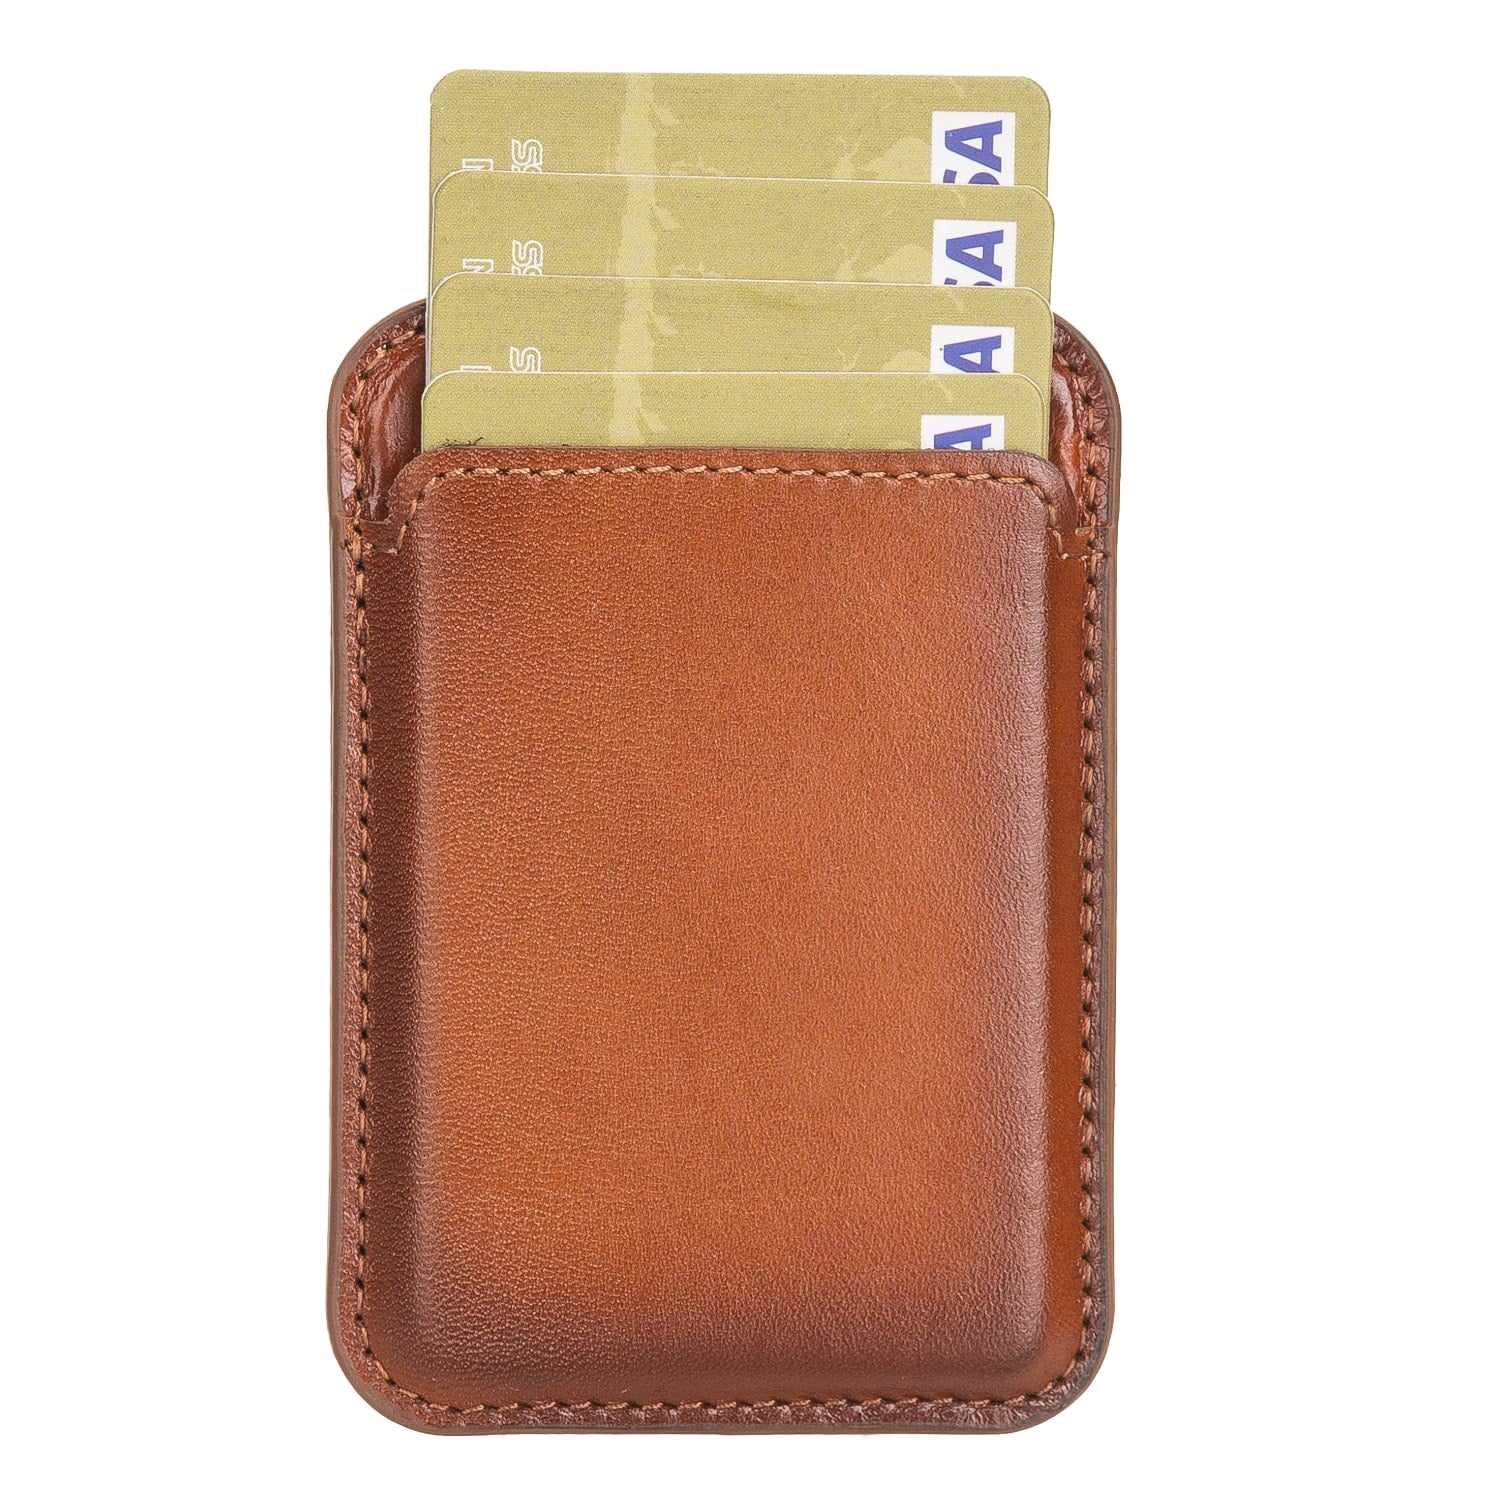 Brown Leather Apple MagSafe Card Holder Magnetic Wallet for iPhone - Bomonti - 2